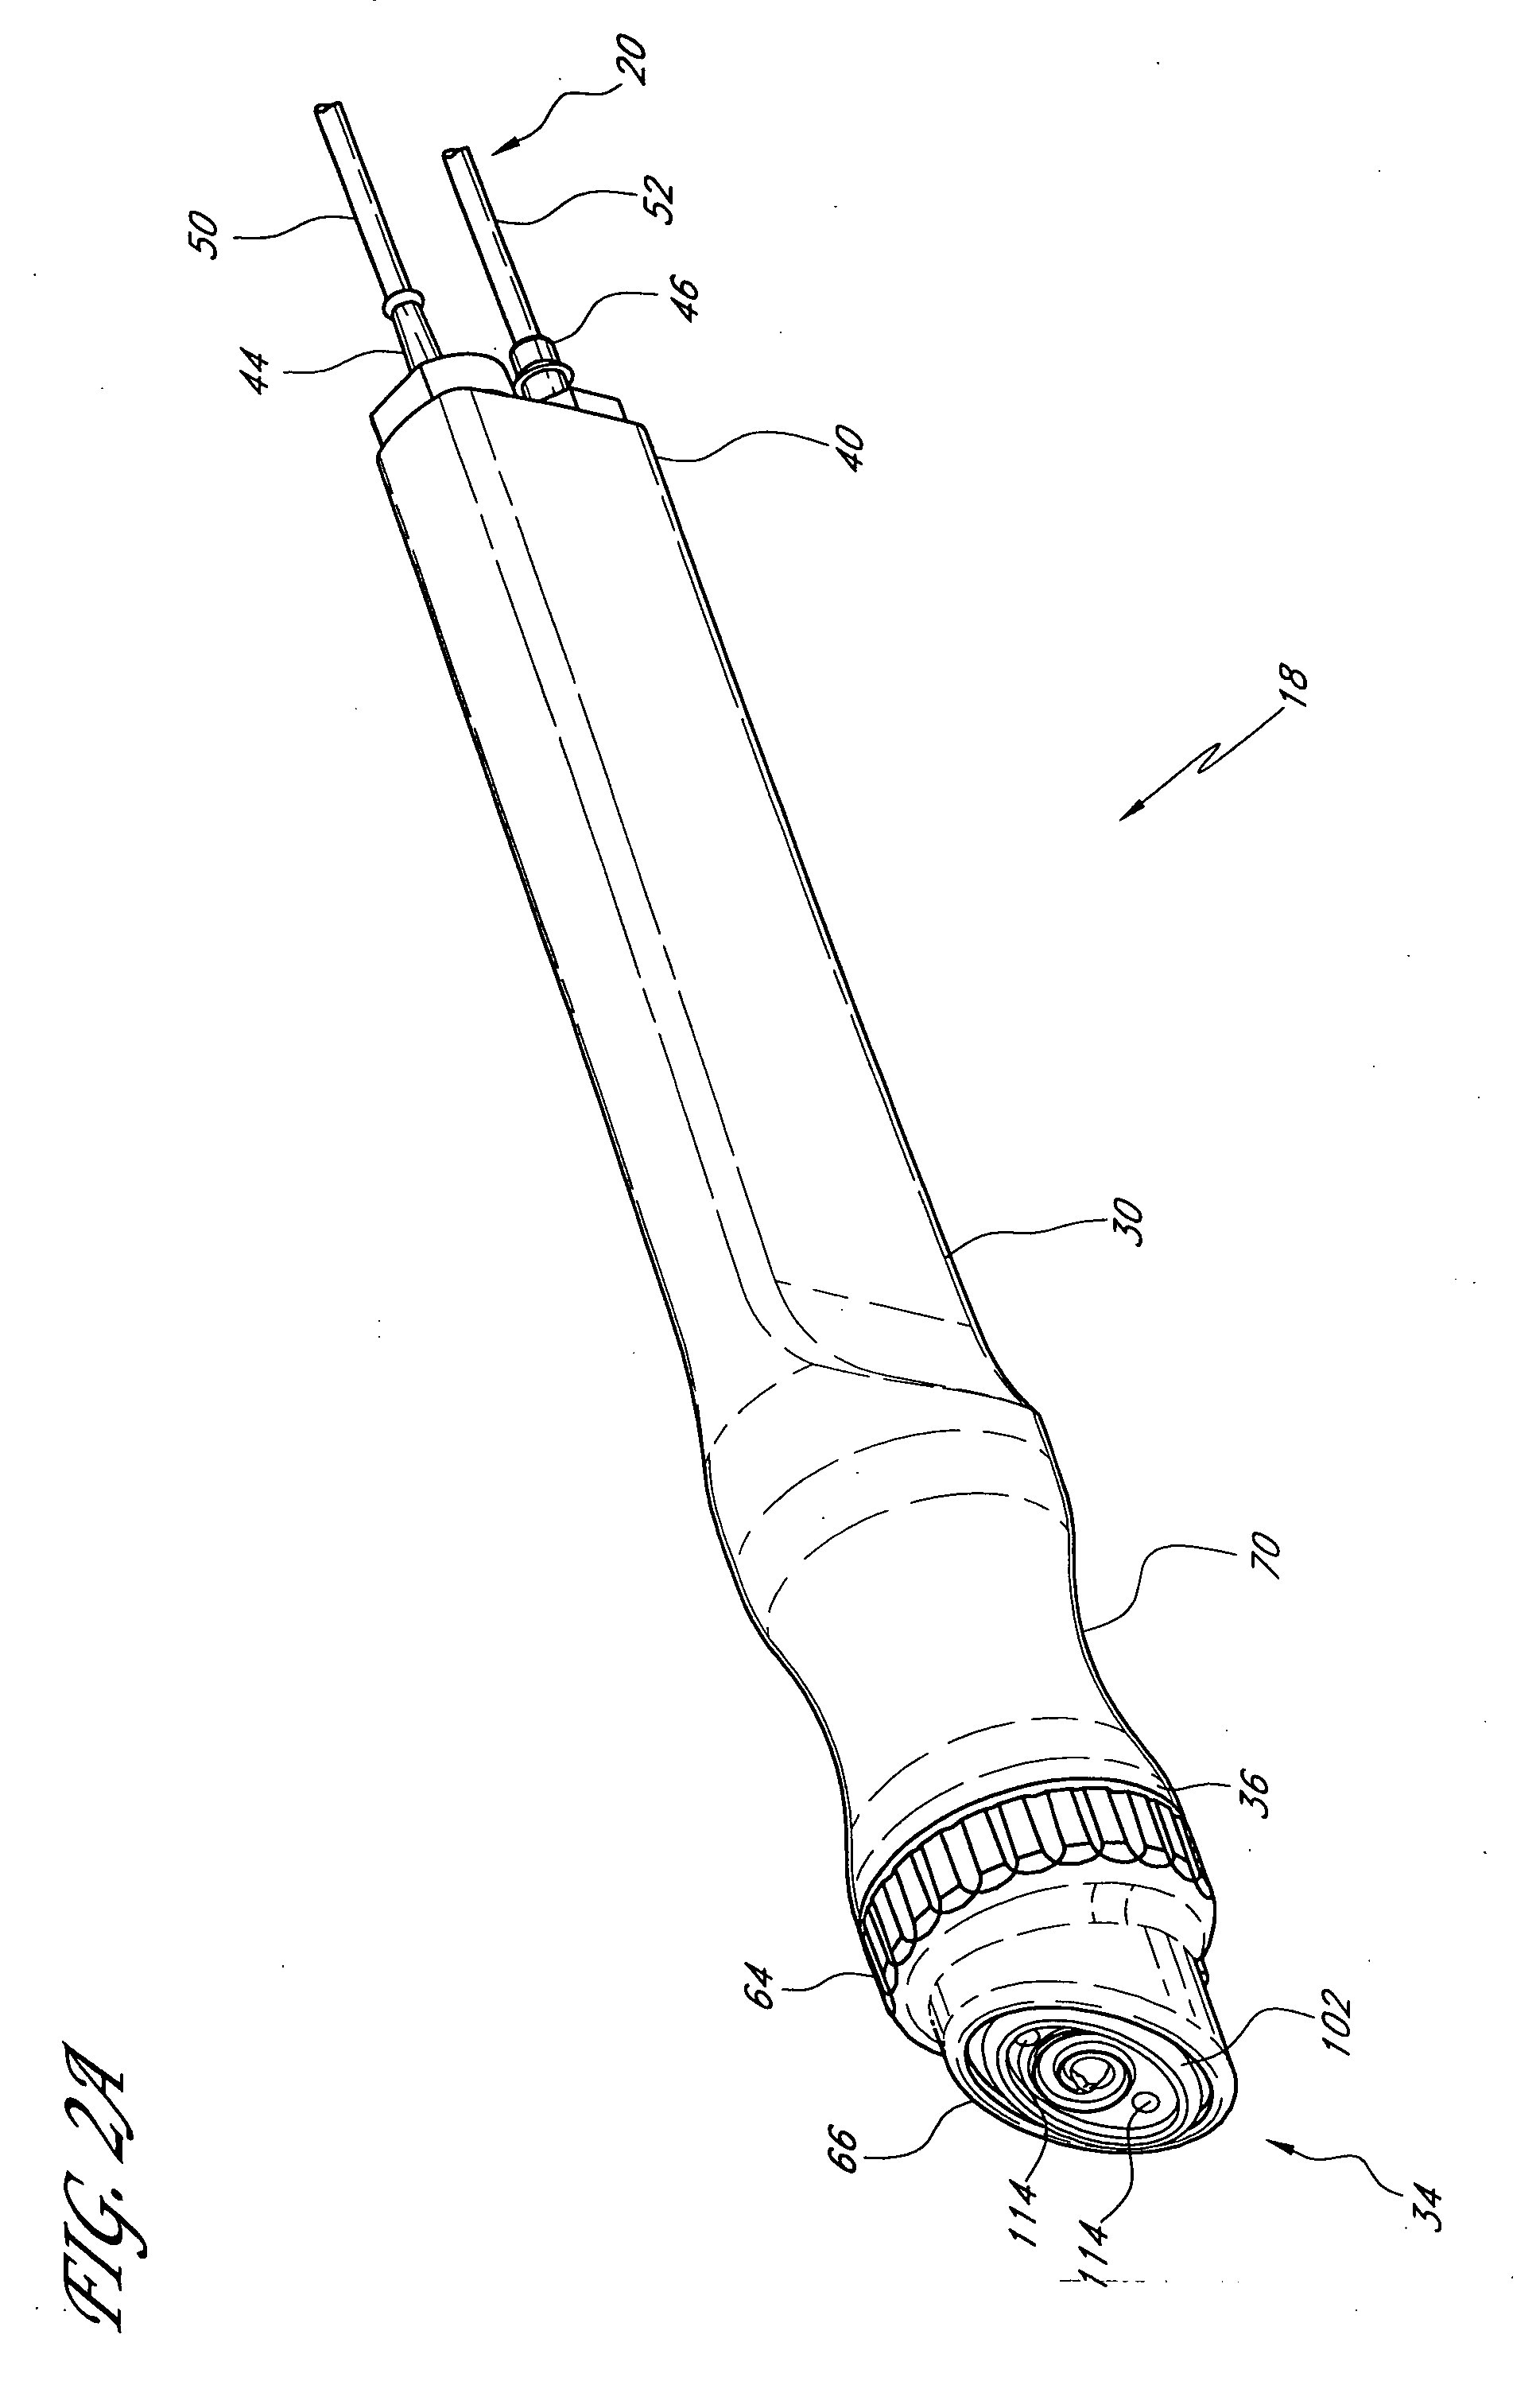 Apparatus and methods for treating the skin